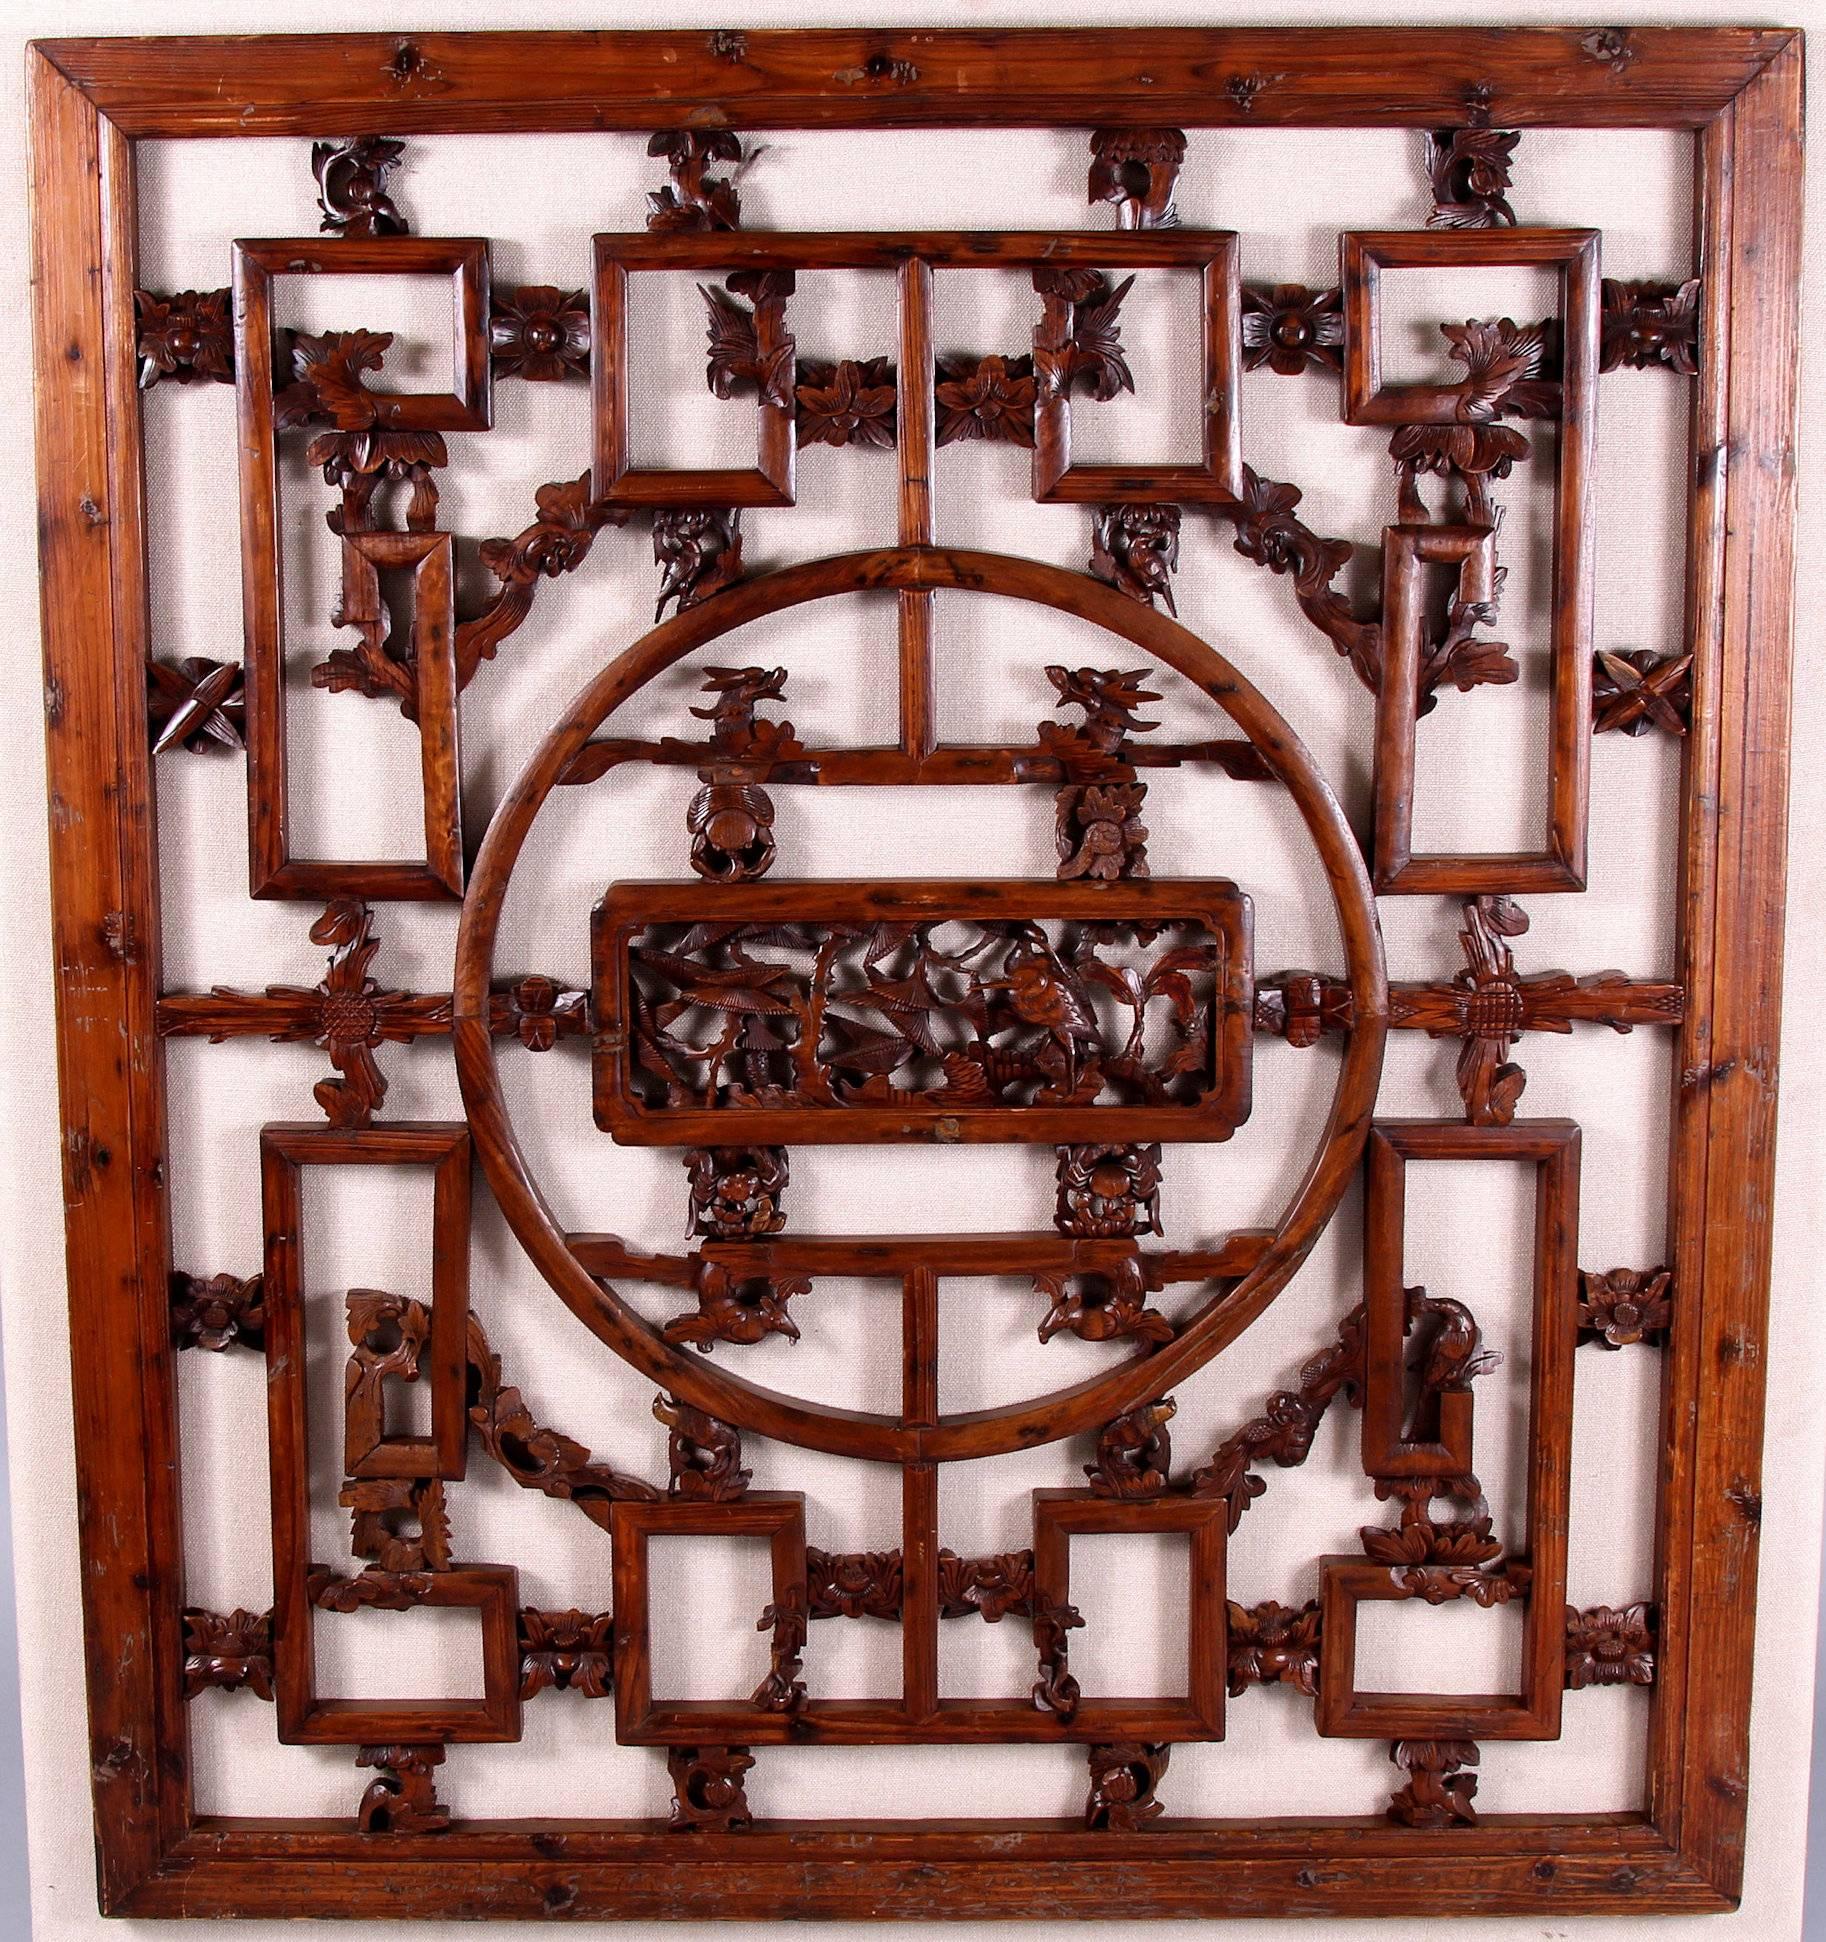 Superb Qianlong period early 19th century Chinese lattice panel. The impressive size, carving, high attention to detail and quality of this piece is absolutely superb. When you look in close inspection, you will see the most beautiful figural detail